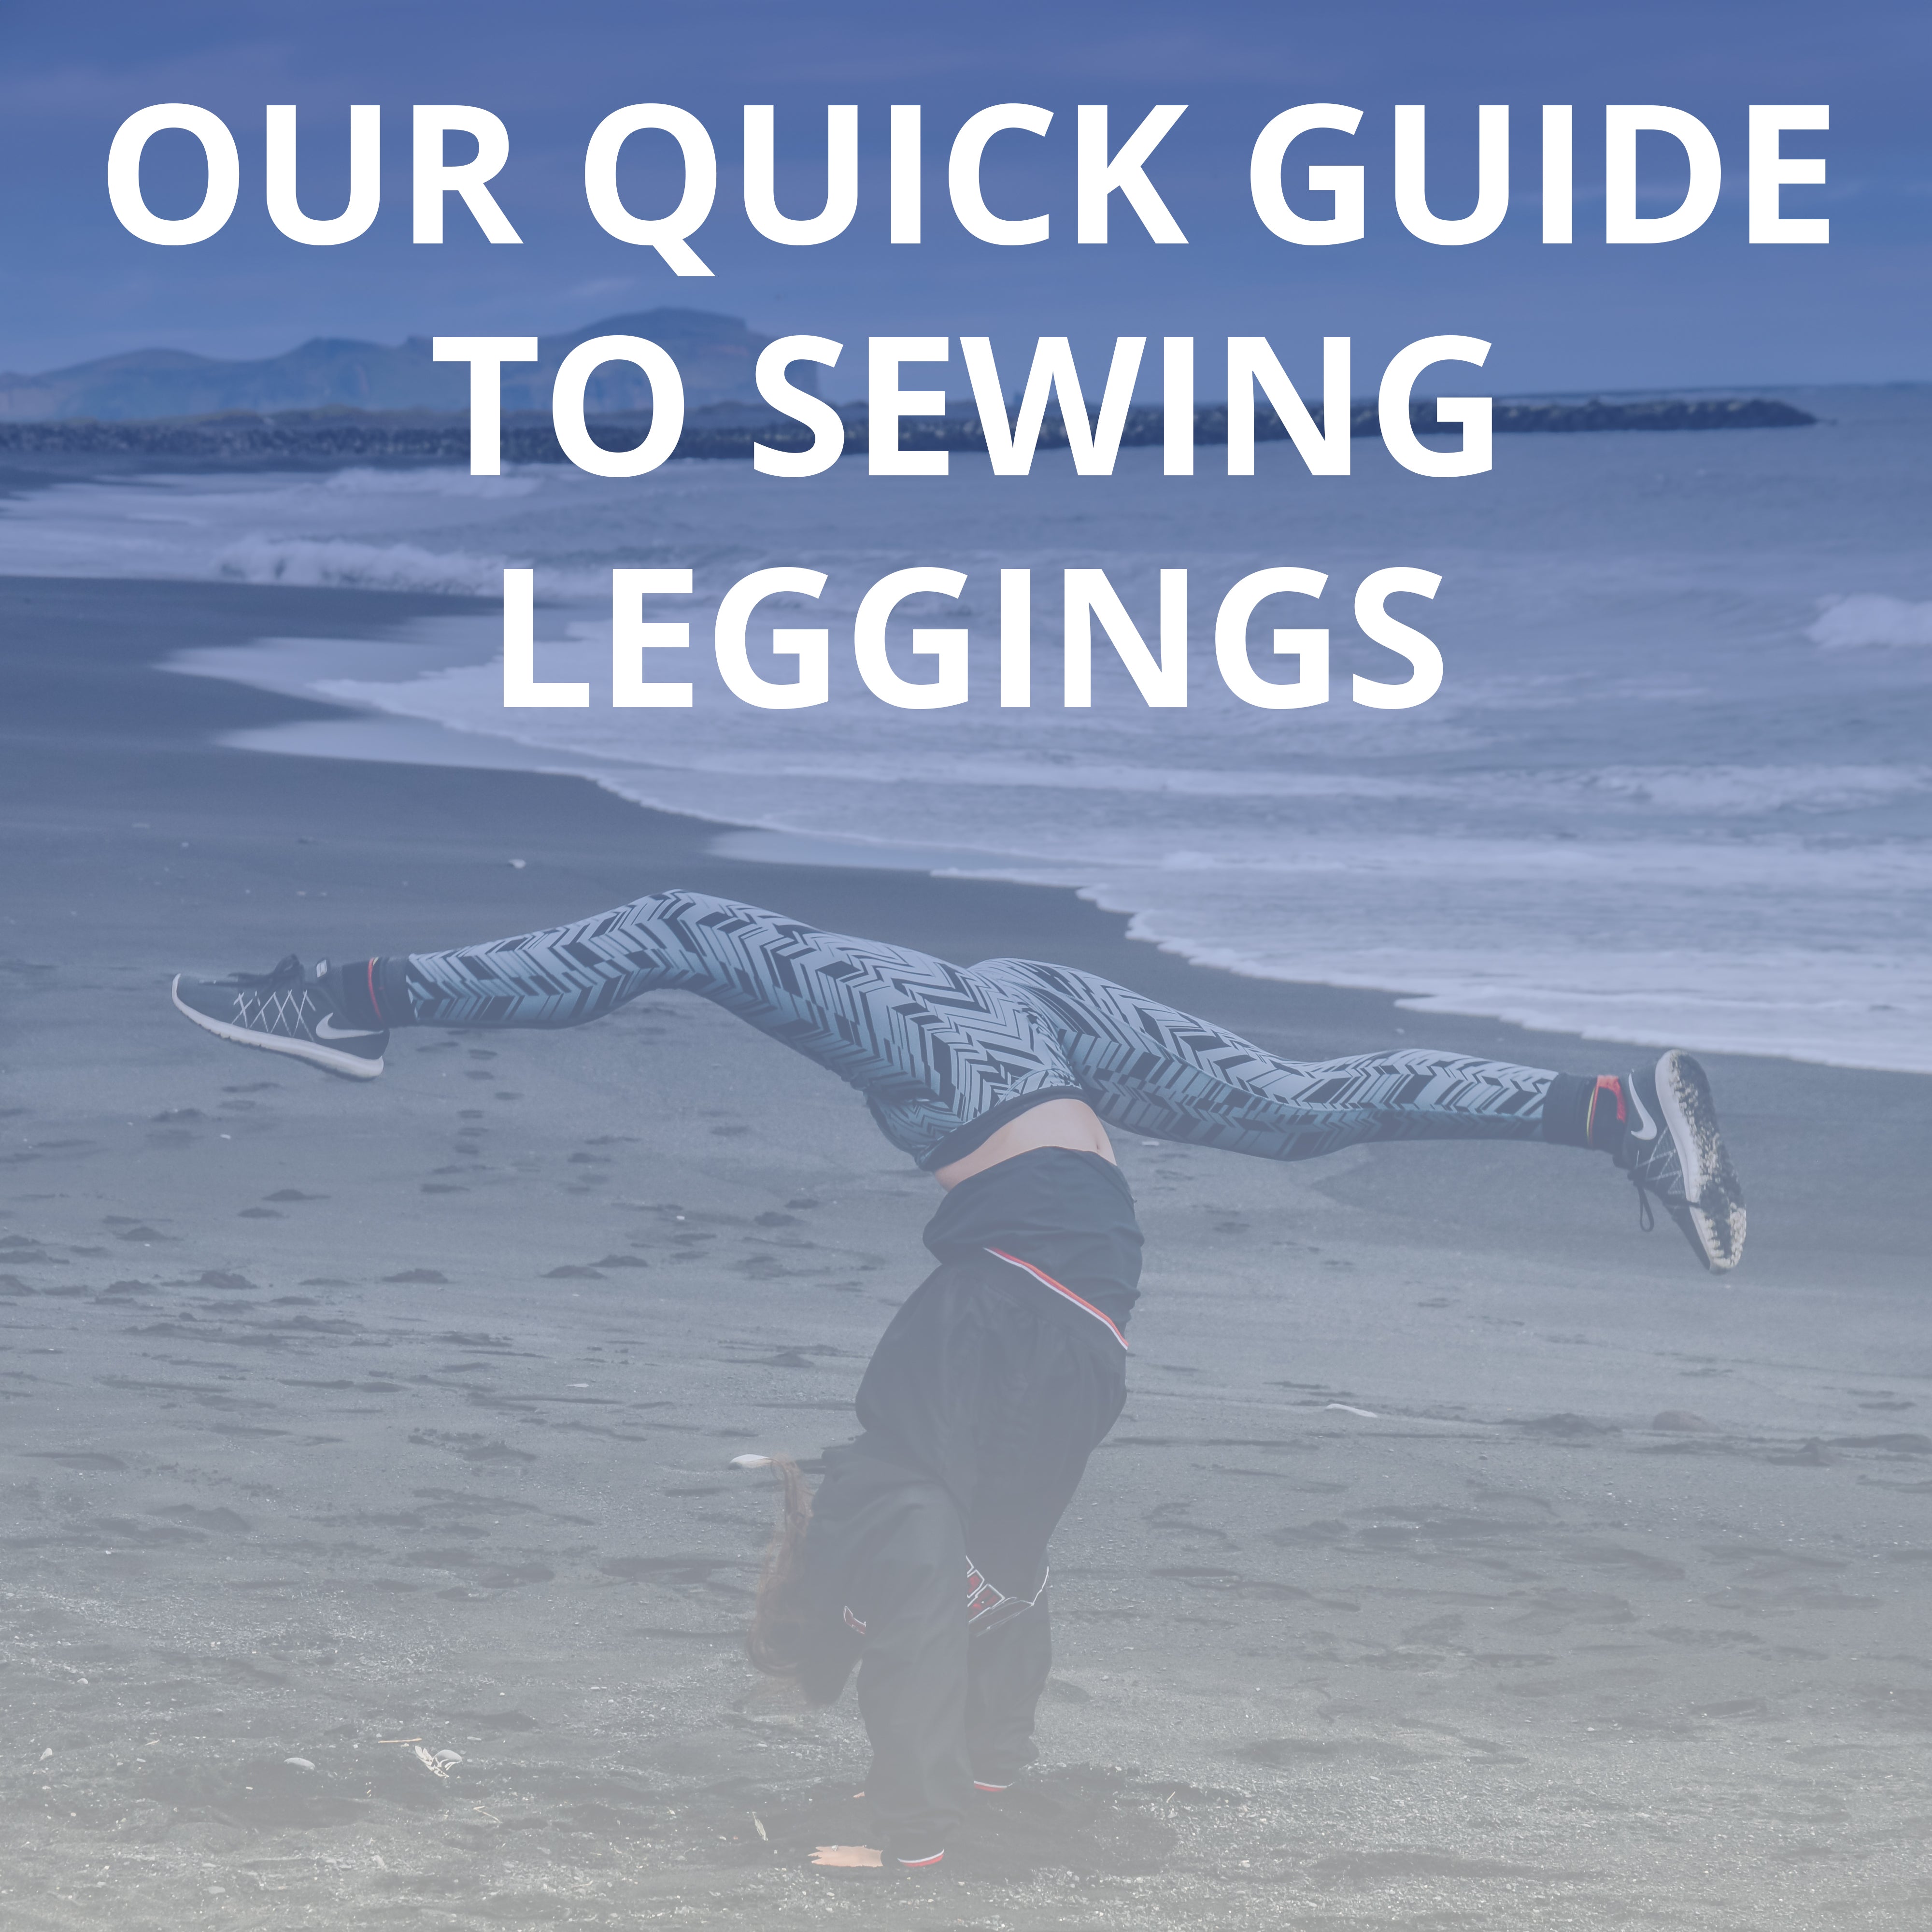 Our quick guide to sewing leggings